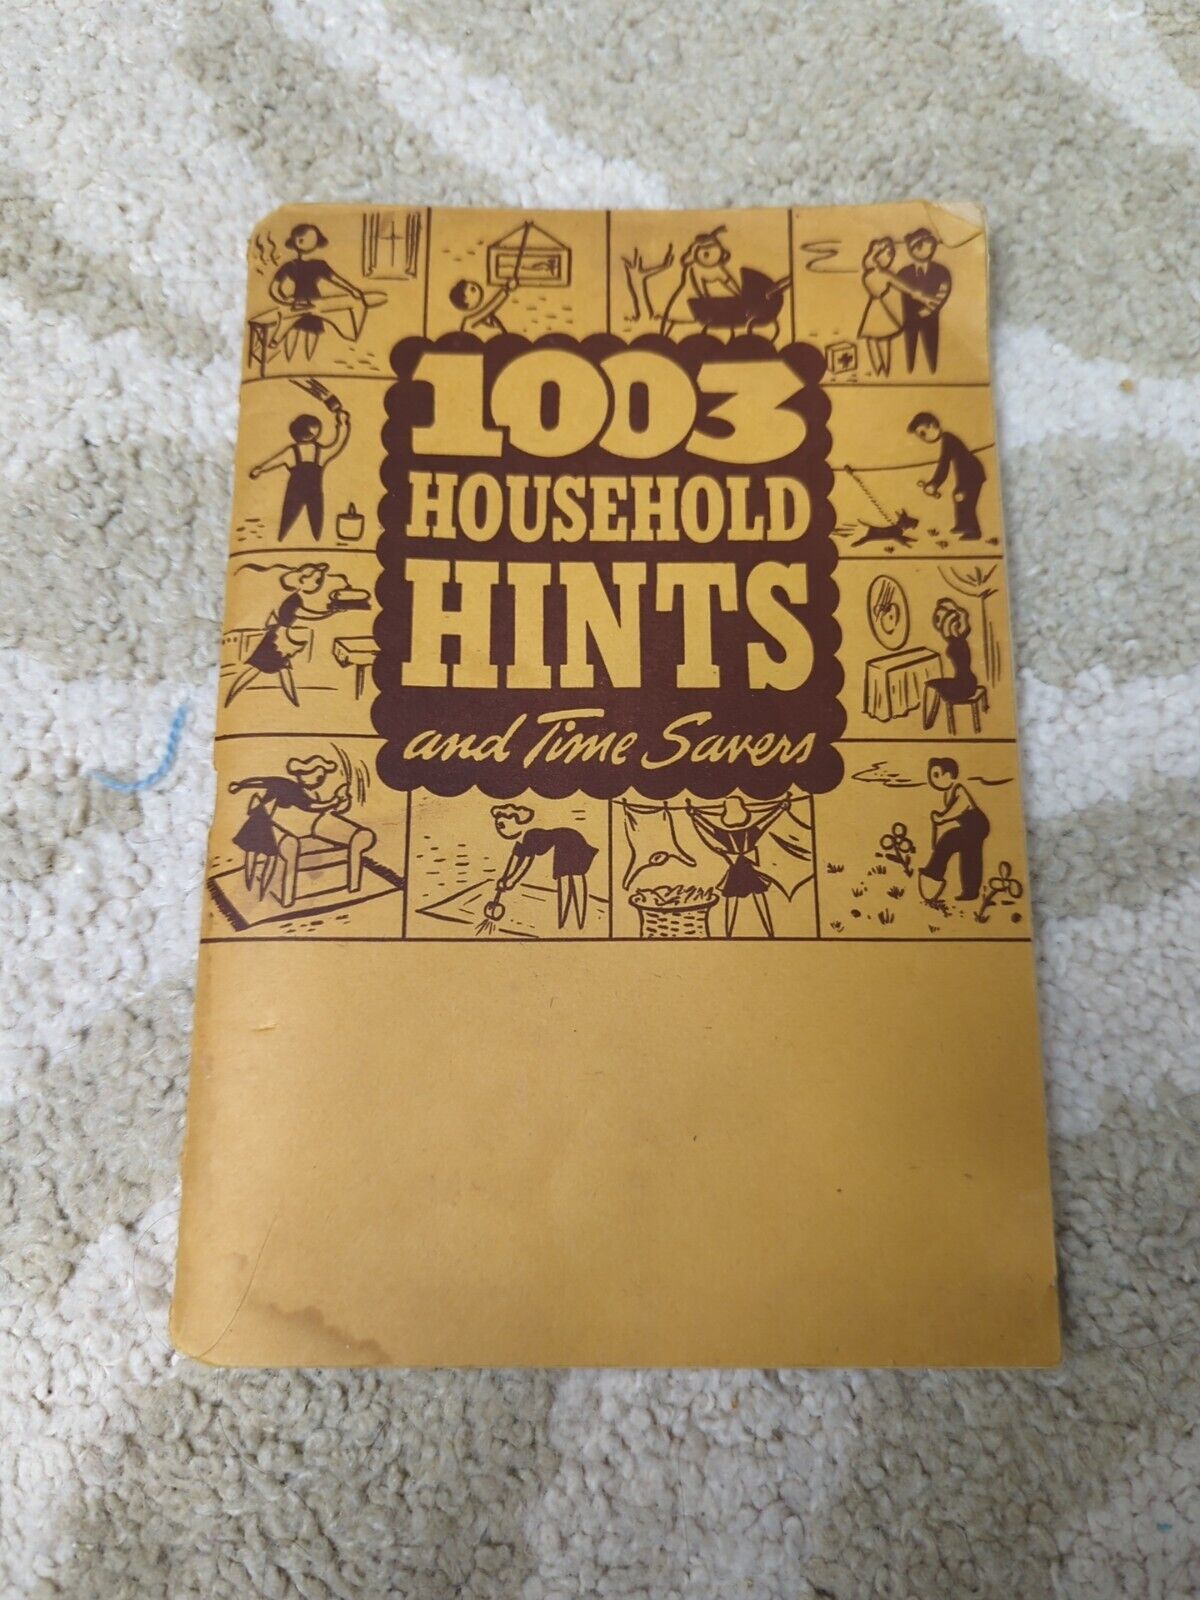 1941 1003 HOUSEHOLD HINTS AND TIME SAVERS 64 PAGES EXC VINTAGE BOOKLET 